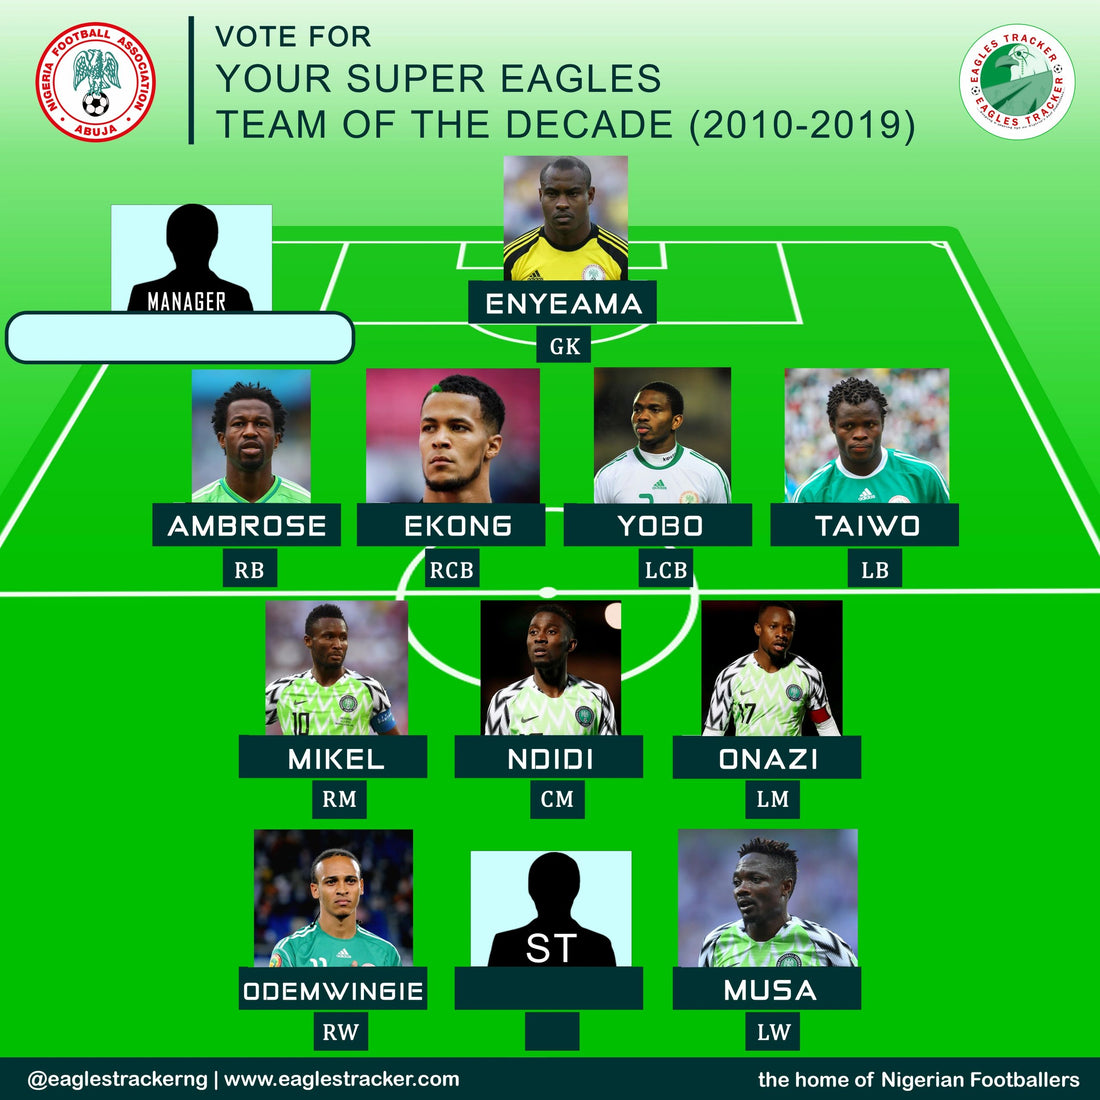 VOTE FOR YOUR SUPER EAGLES TEAM OF THE DECADE